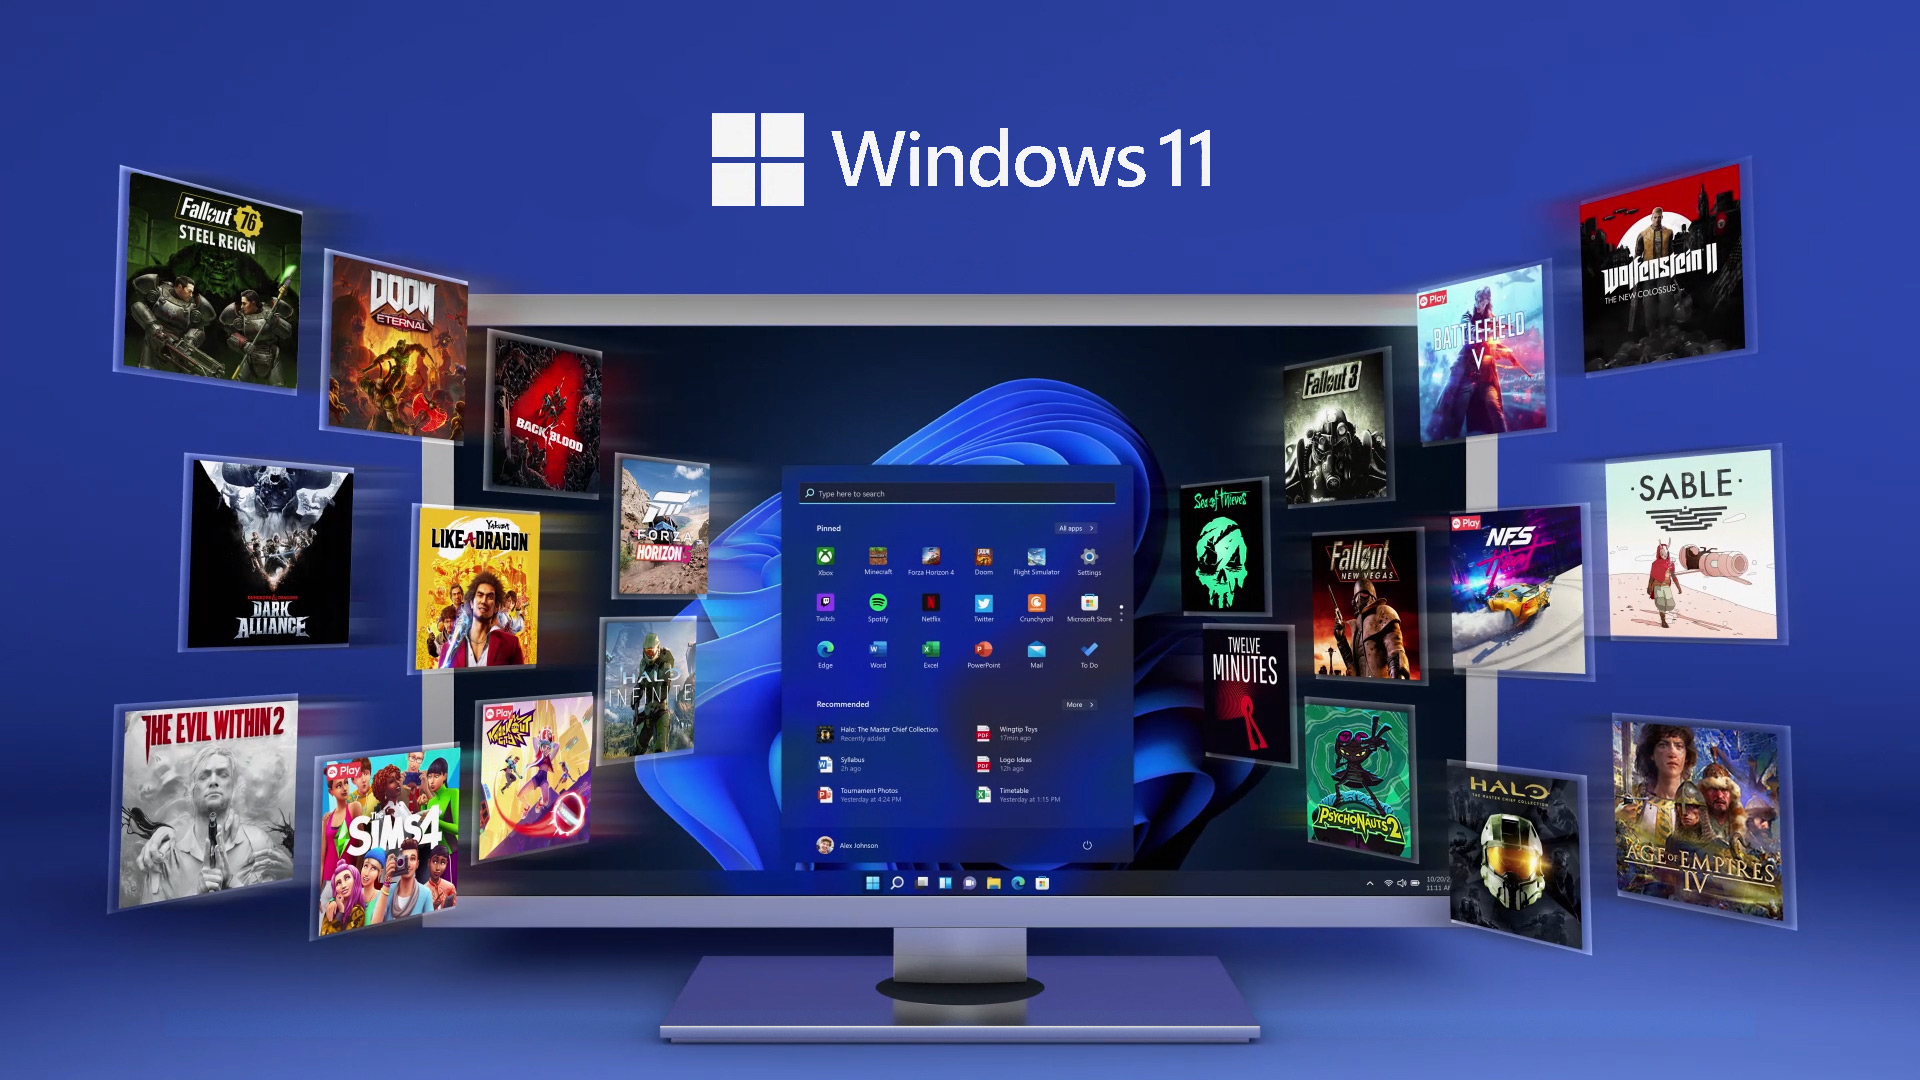 DirectStorage is here to speed up PC games on Windows